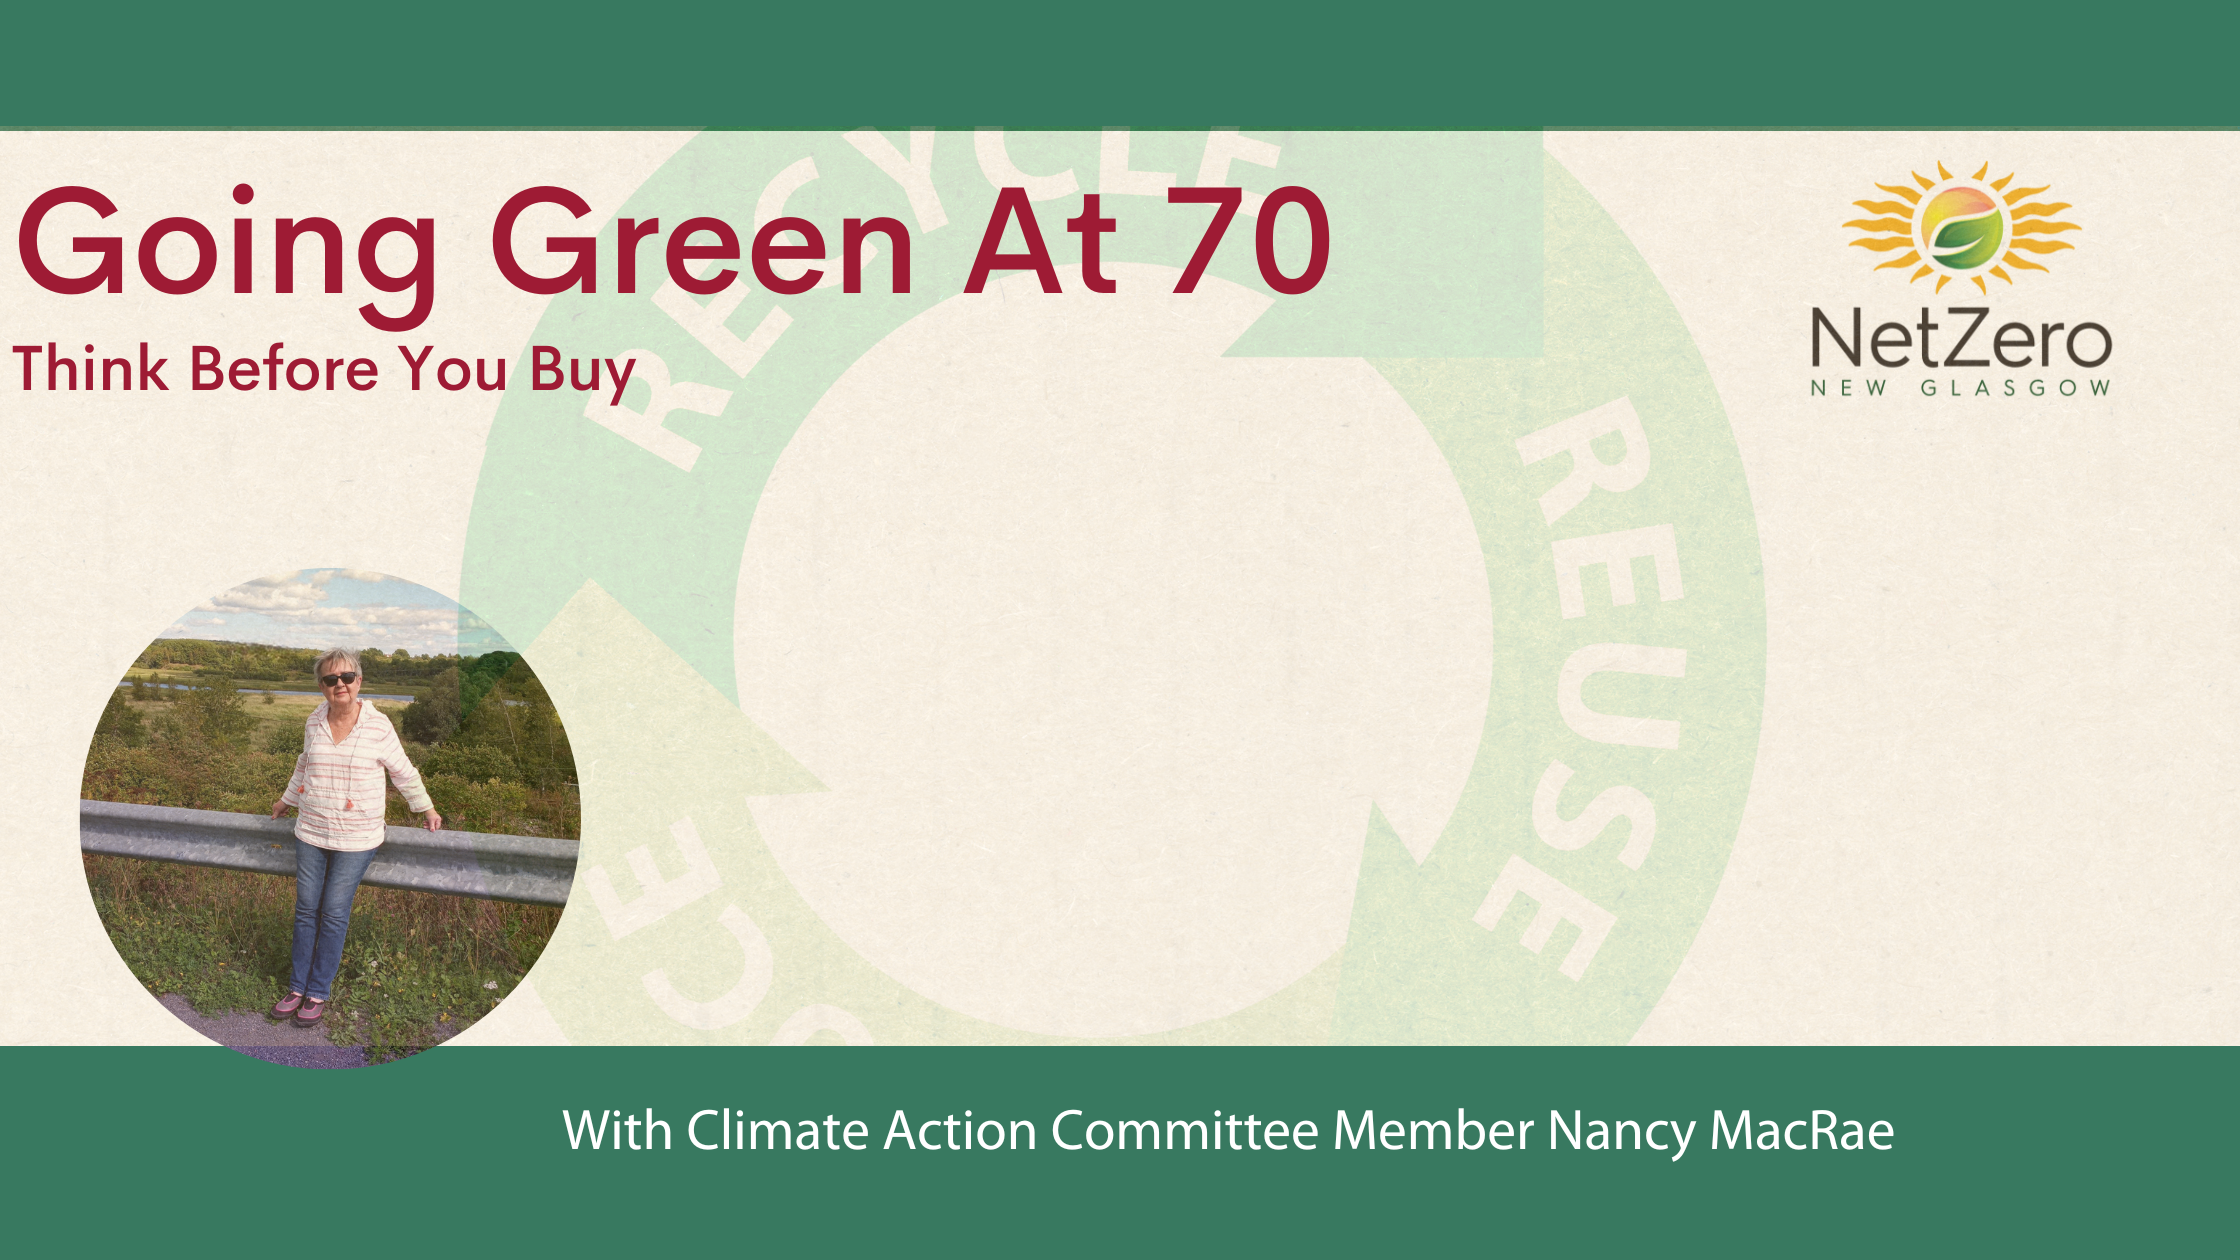 Going Green at 70 Blog Posts think before you buy